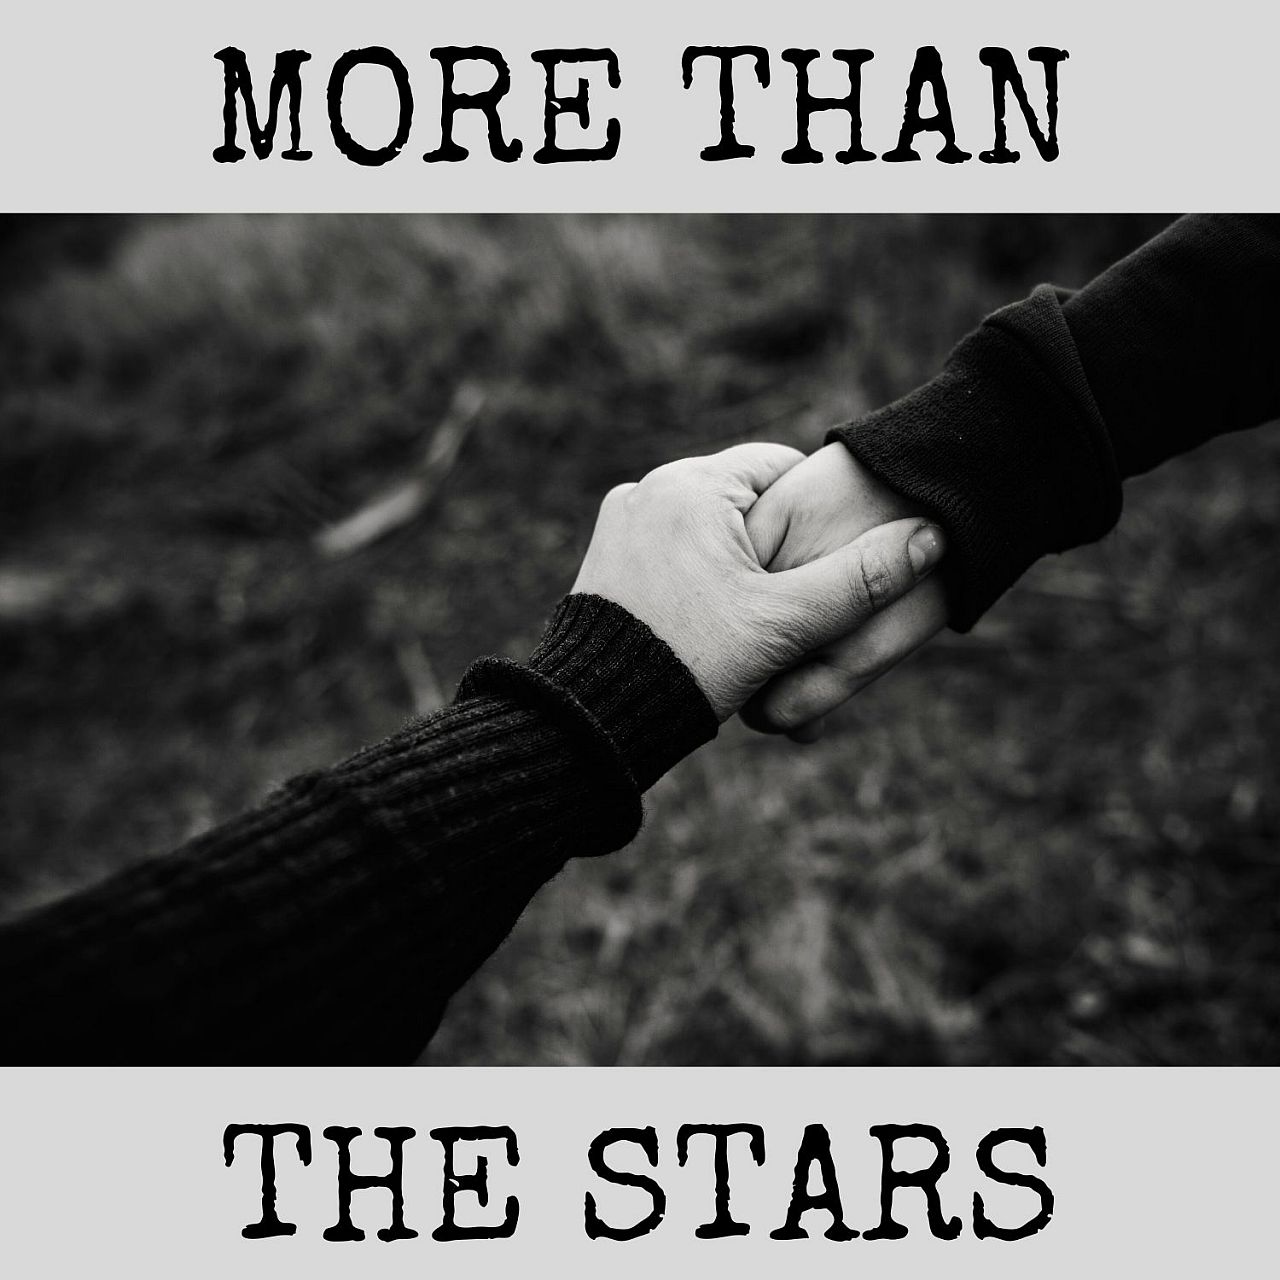 More than the stars